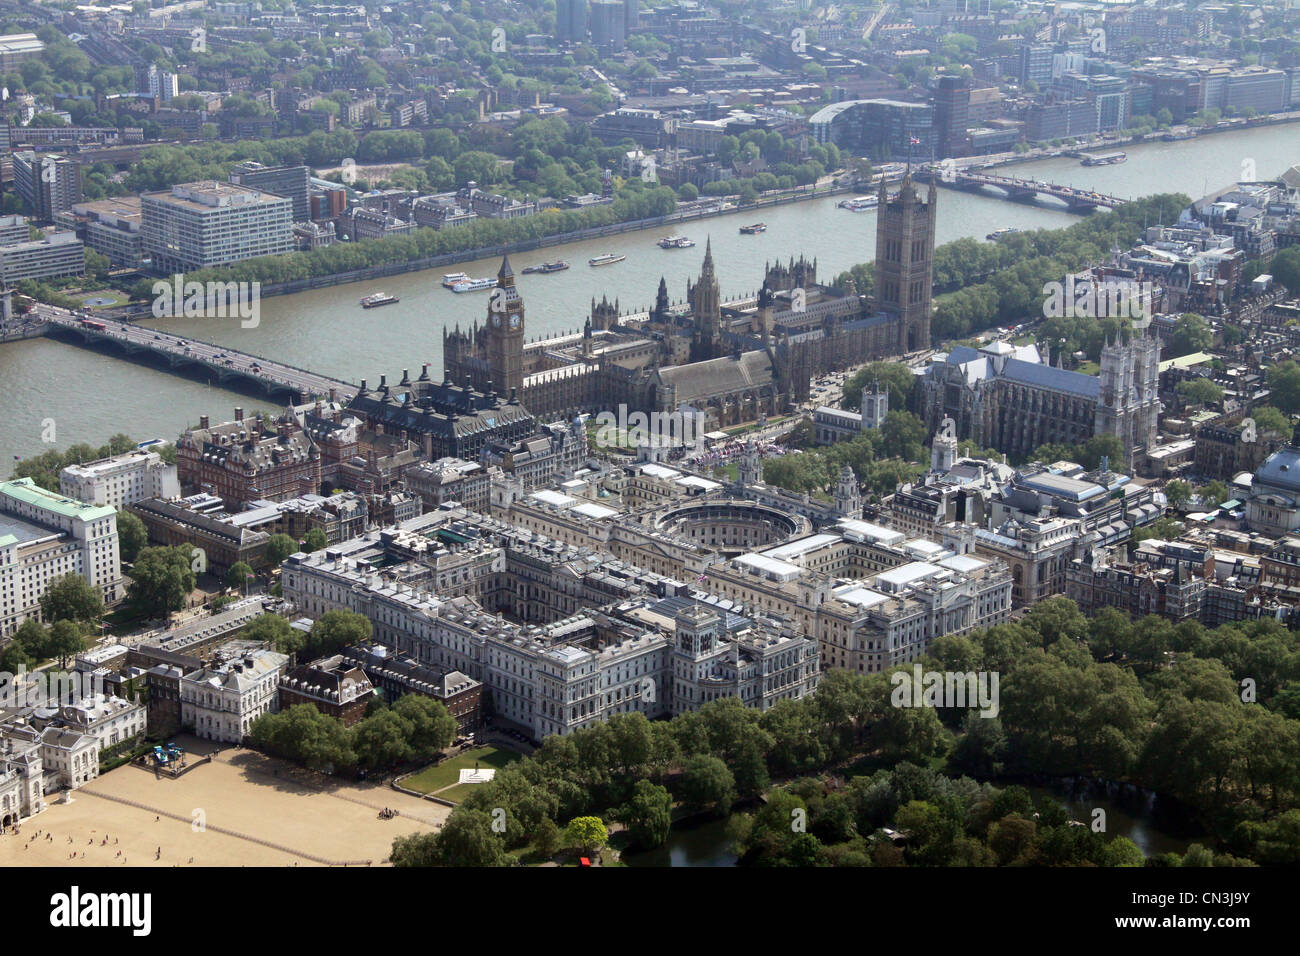 Aerial view of 10 Downing Street & Foreign & Commonwealth Office looking towards the Houses of Parliament and River Thames in the background, London Stock Photo